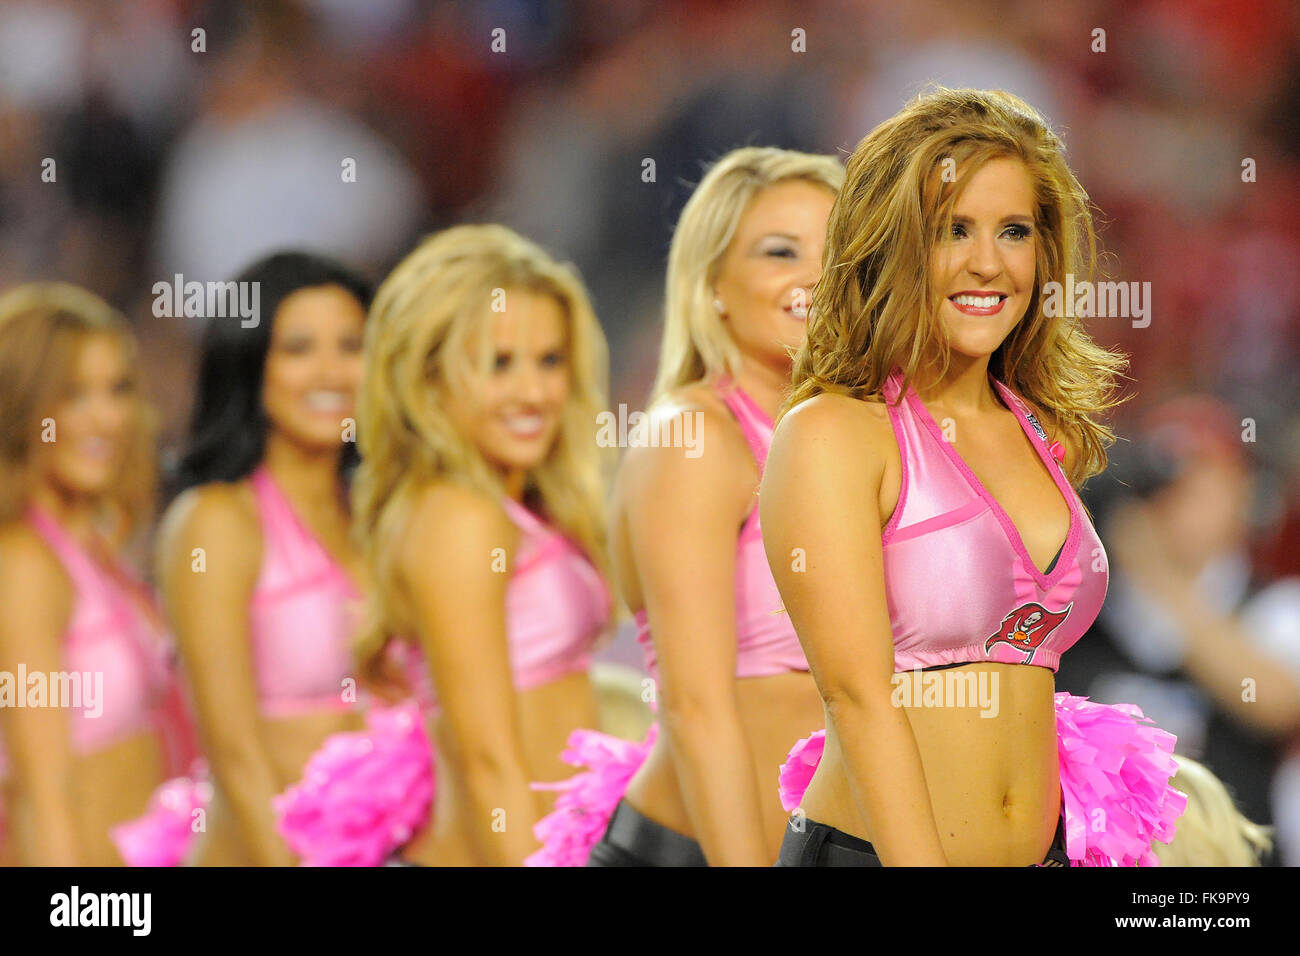 Tampa, Fla, USA. 3rd Oct, 2011. Tampa Bay Buccaneers cheerleaders during the Bucs 27-17 win over the Indianapolis Colts at Raymond James Stadium on Oct. 3, 2011 in Tampa, Florida. ZUMA PRESS/Scott A. Miller © Scott A. Miller/ZUMA Wire/Alamy Live News Stock Photo